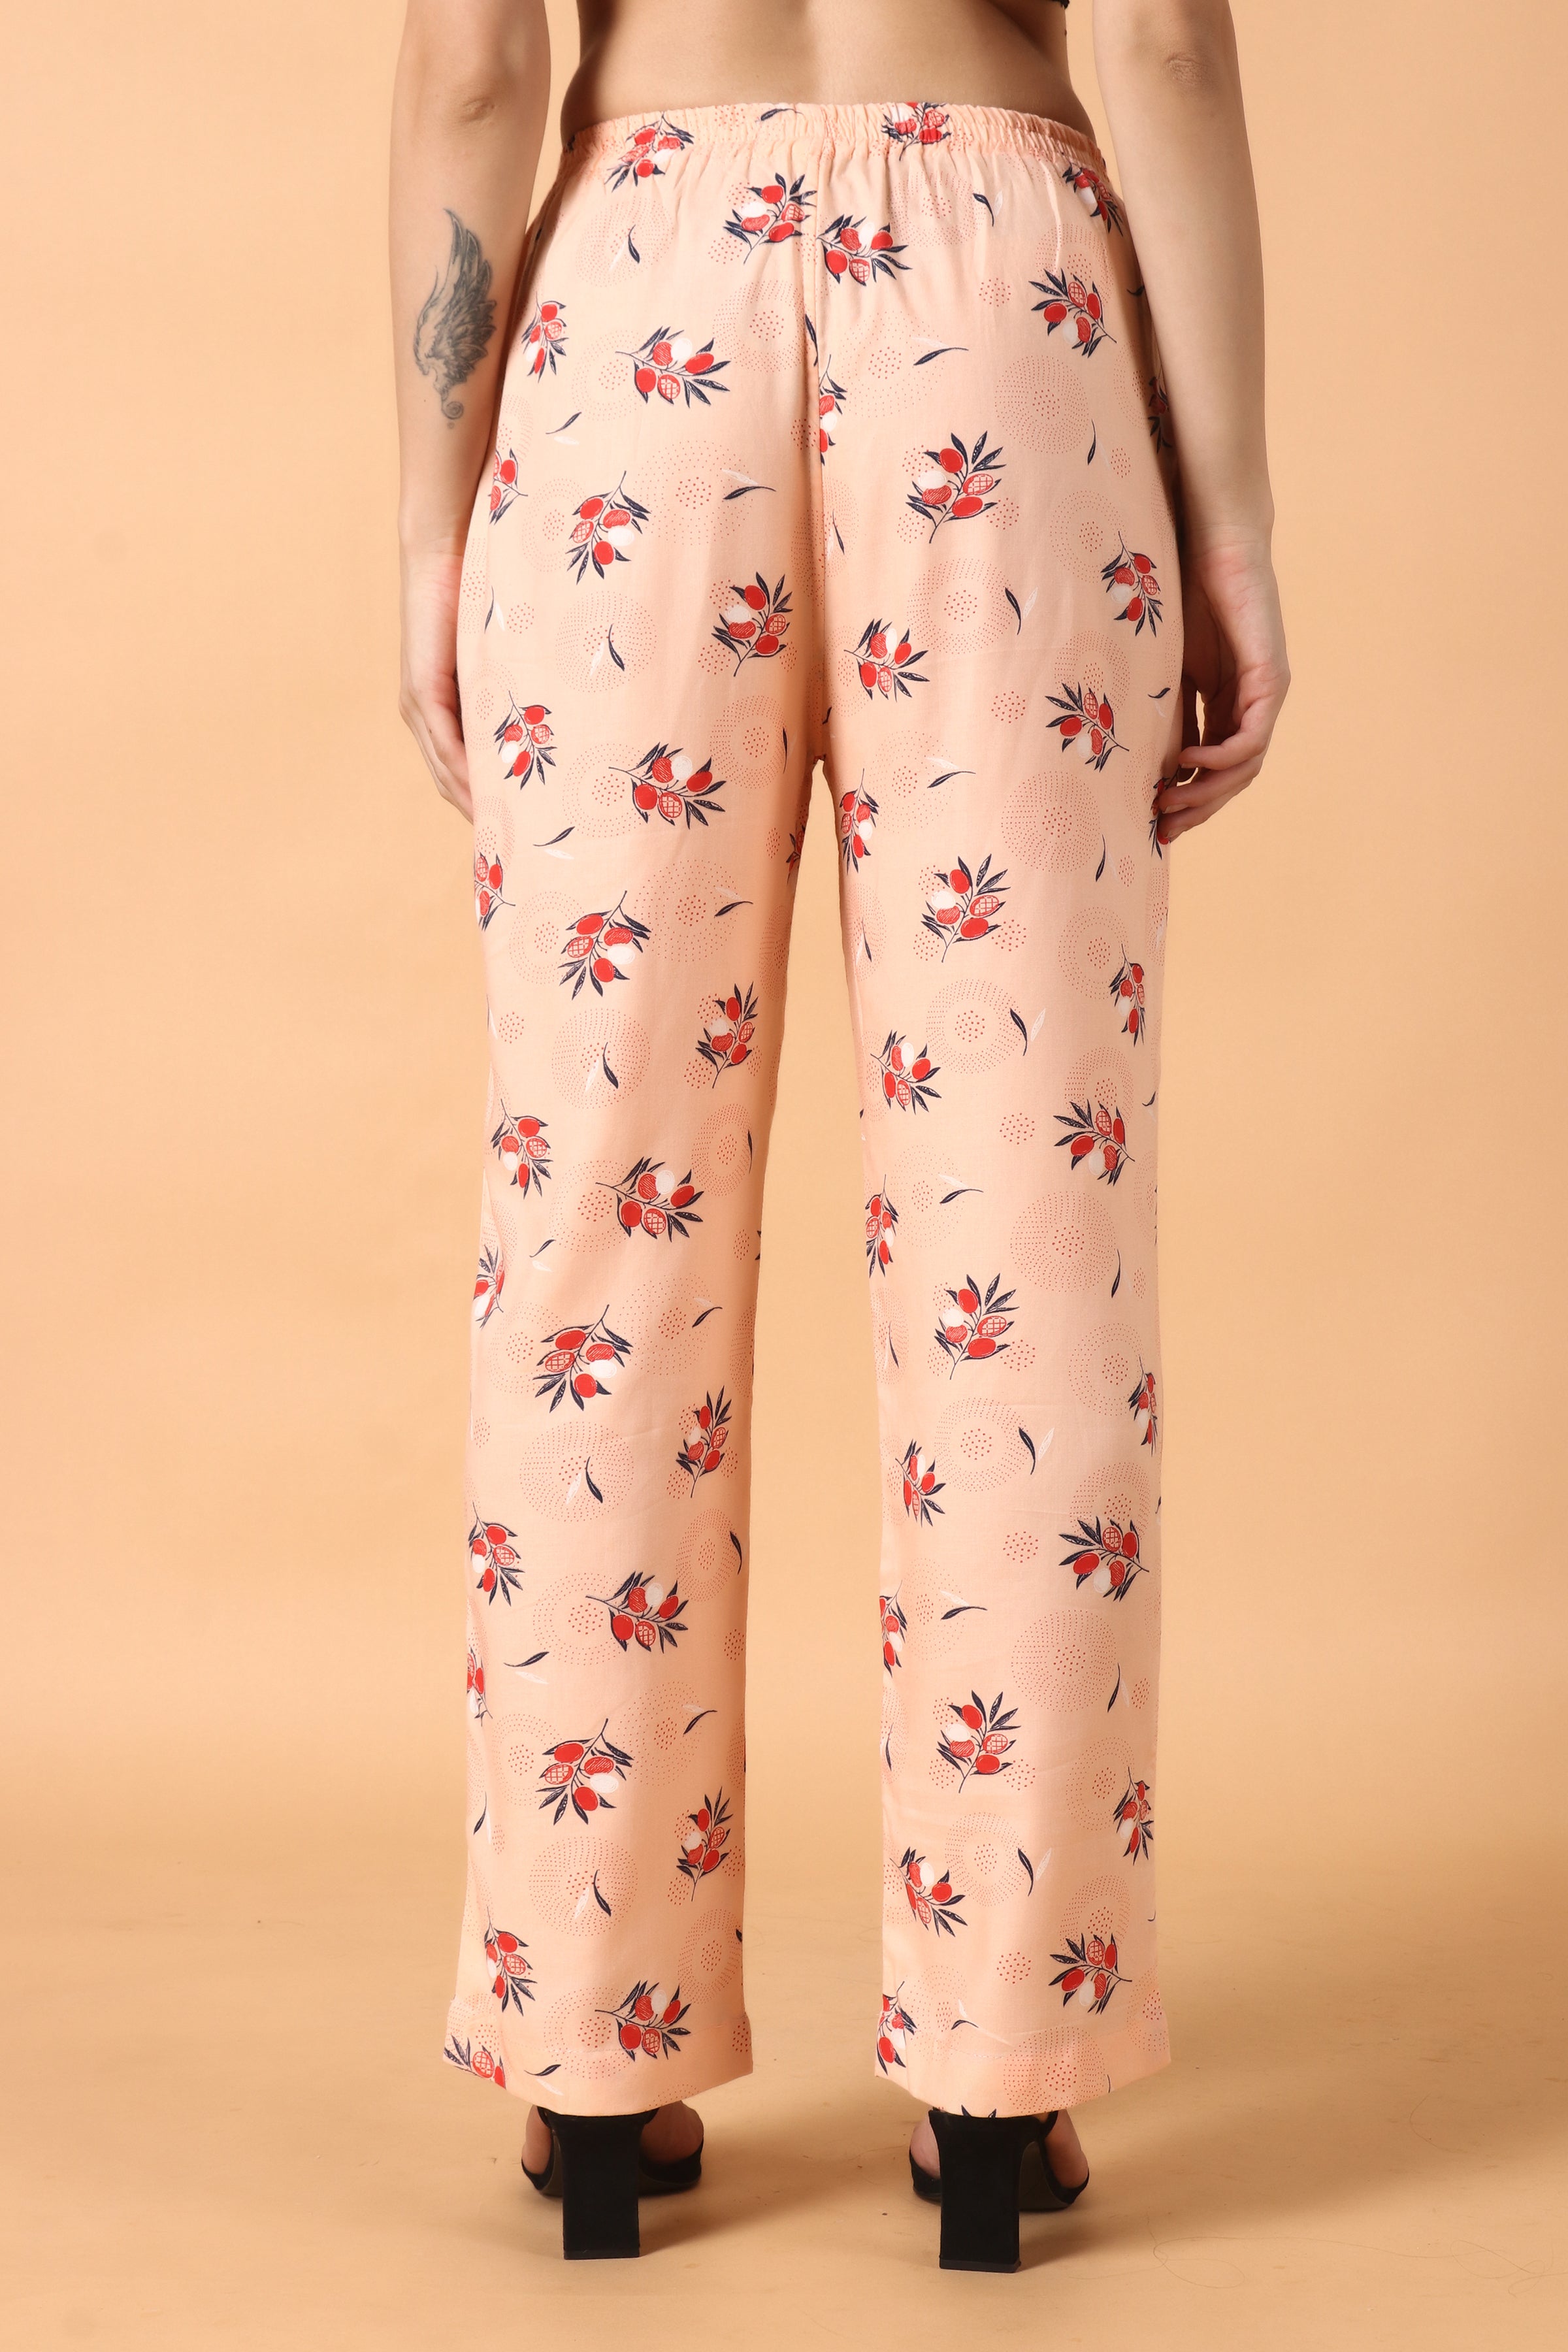 Shop Floral Print Palazzo Pants for Women from latest collection at Forever  21  436213